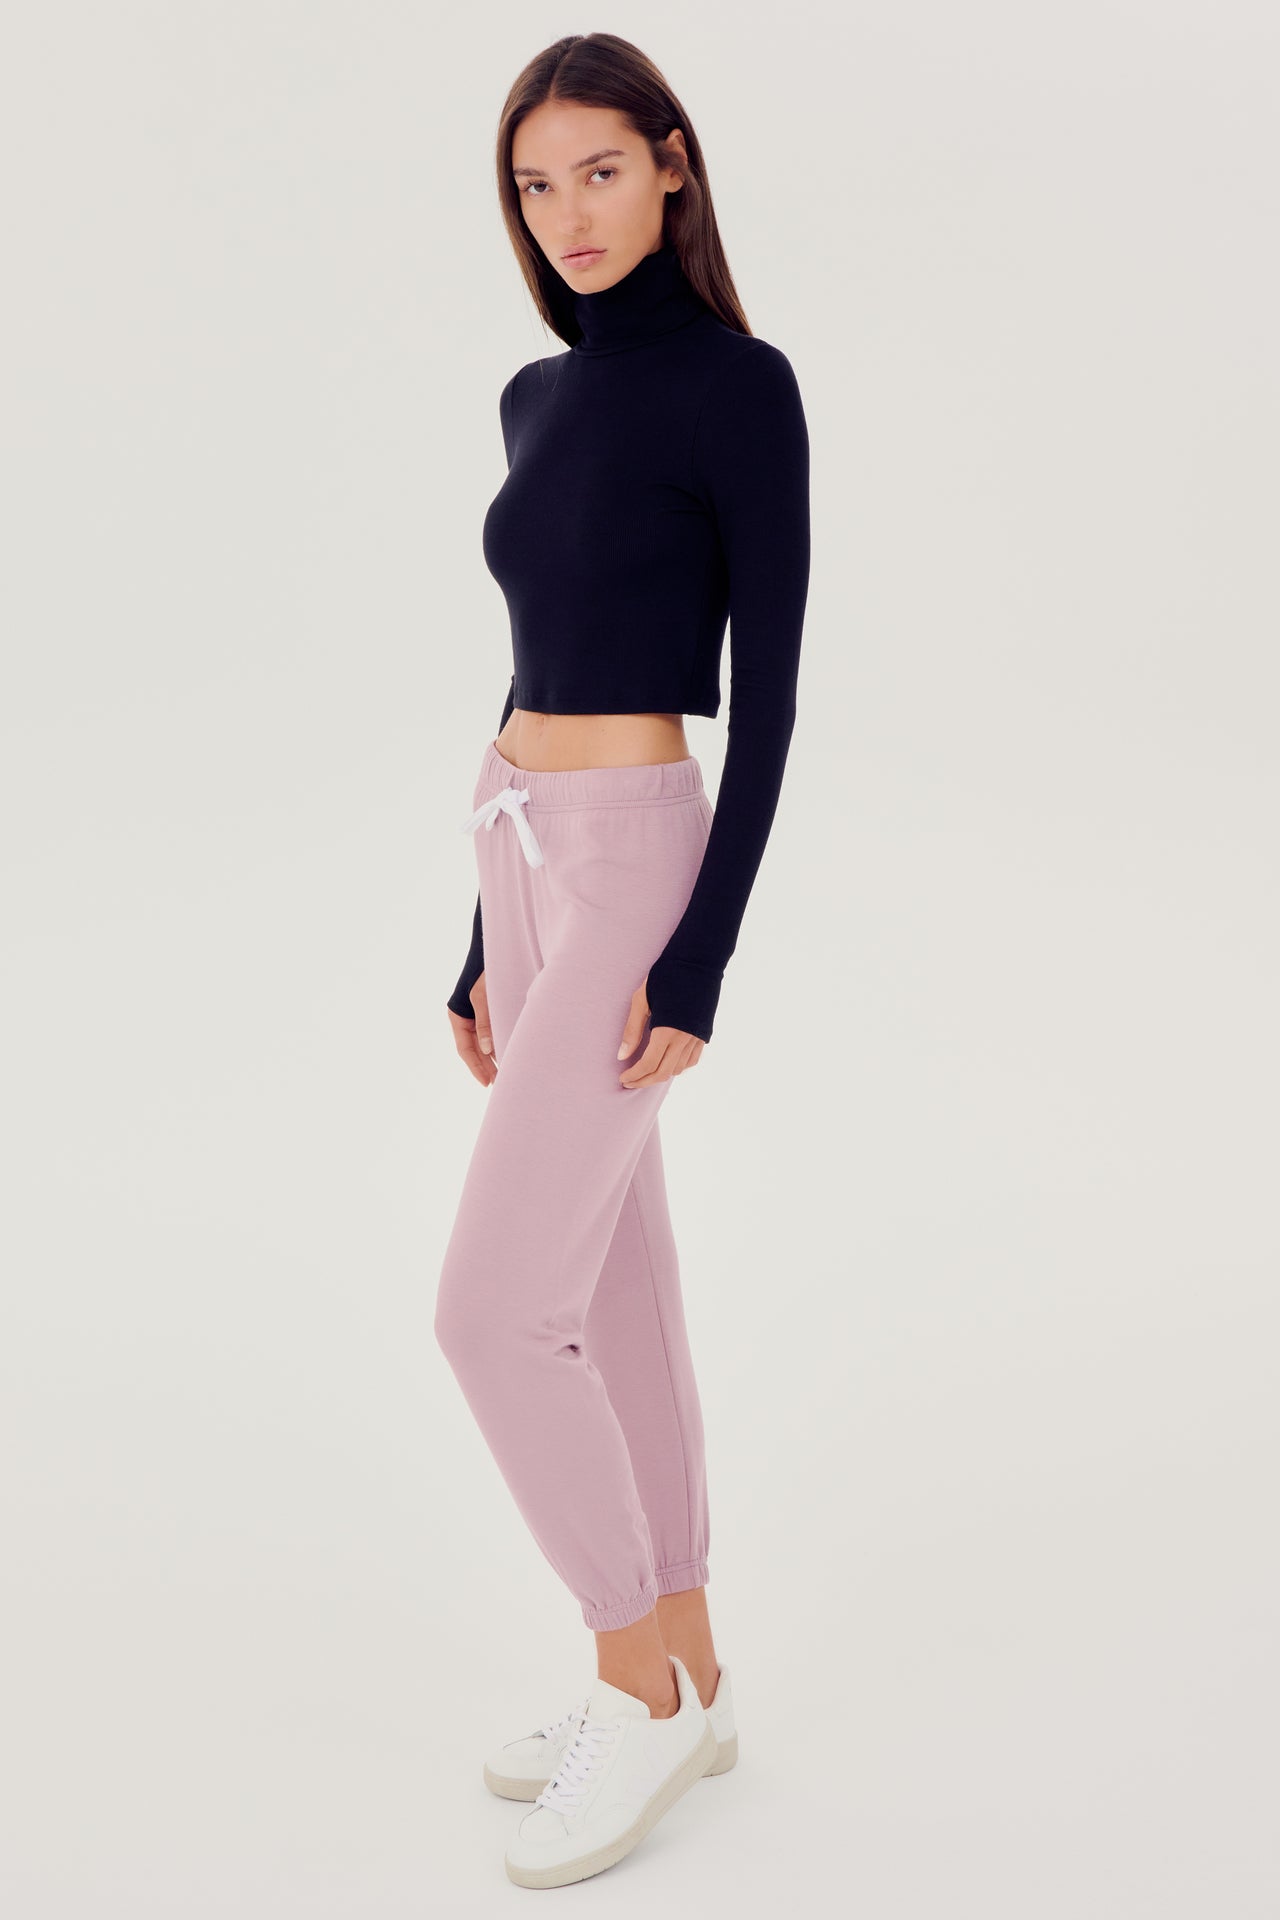 Full front side view of woman with dark straight hair wearing light pink sweatpant jogger with white drawstring and black turtleneck cropped long sleeve paired with white shoes